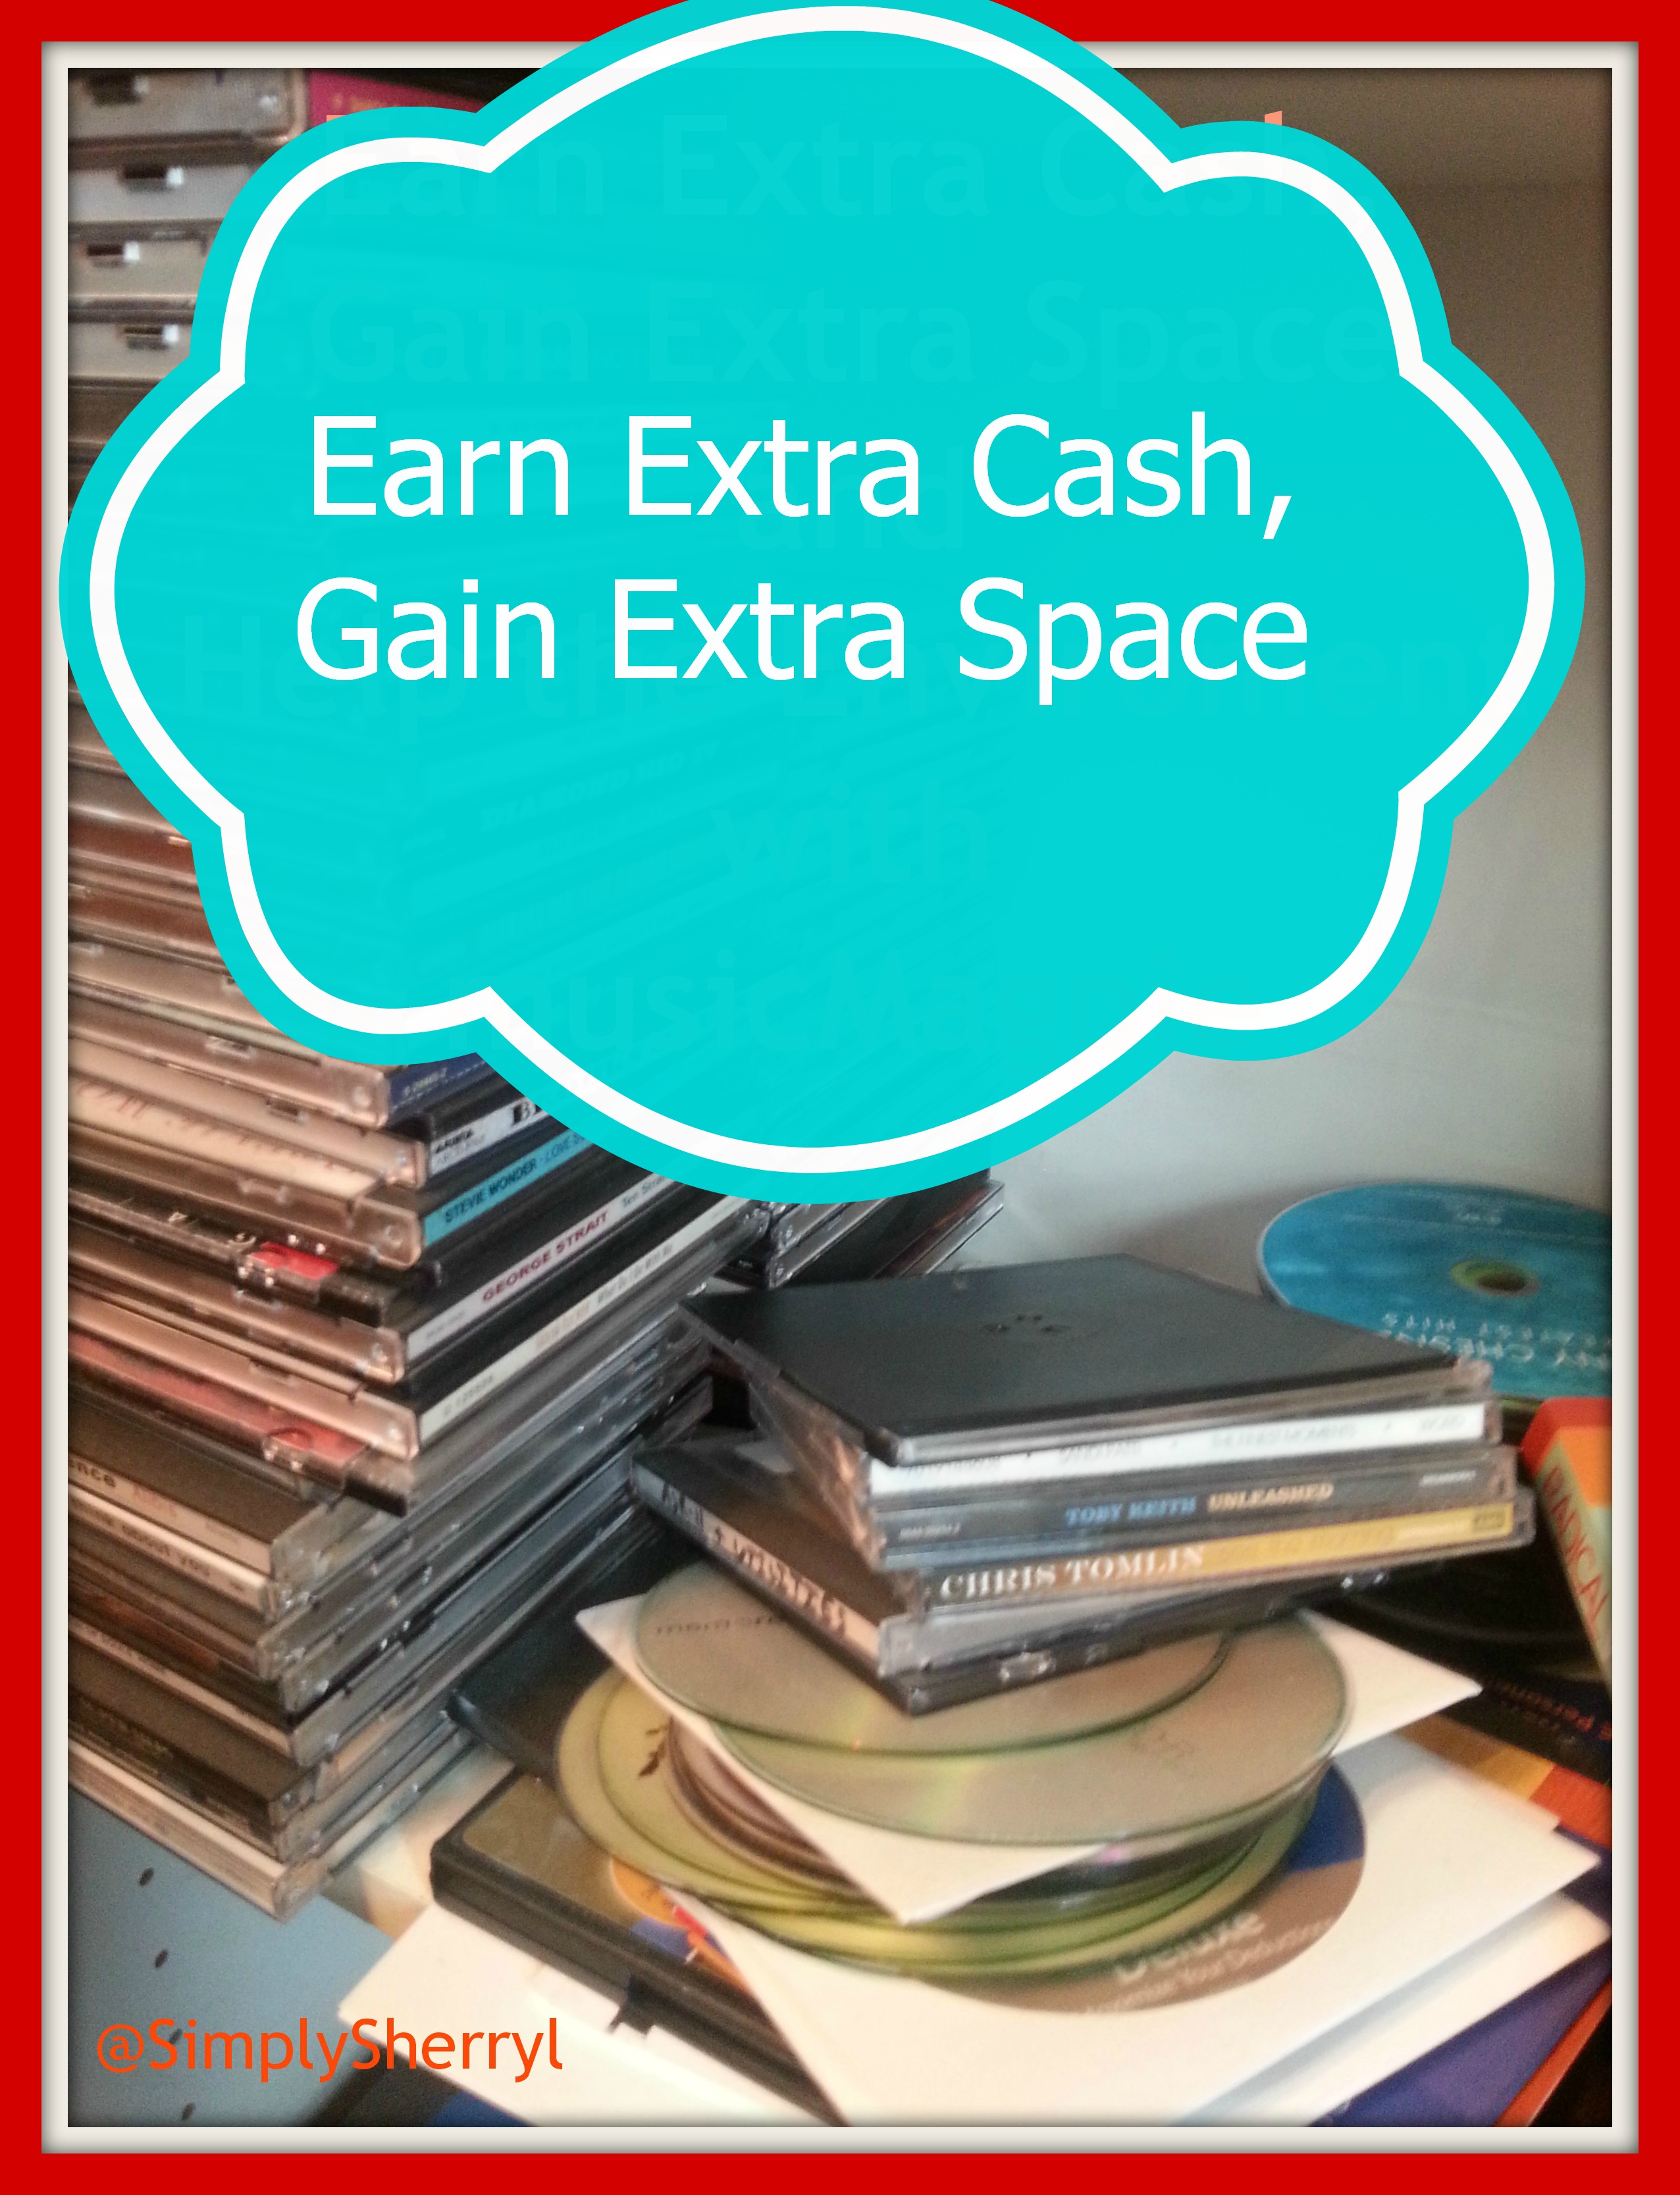 Earn Extra Cash, Gain Extra Space